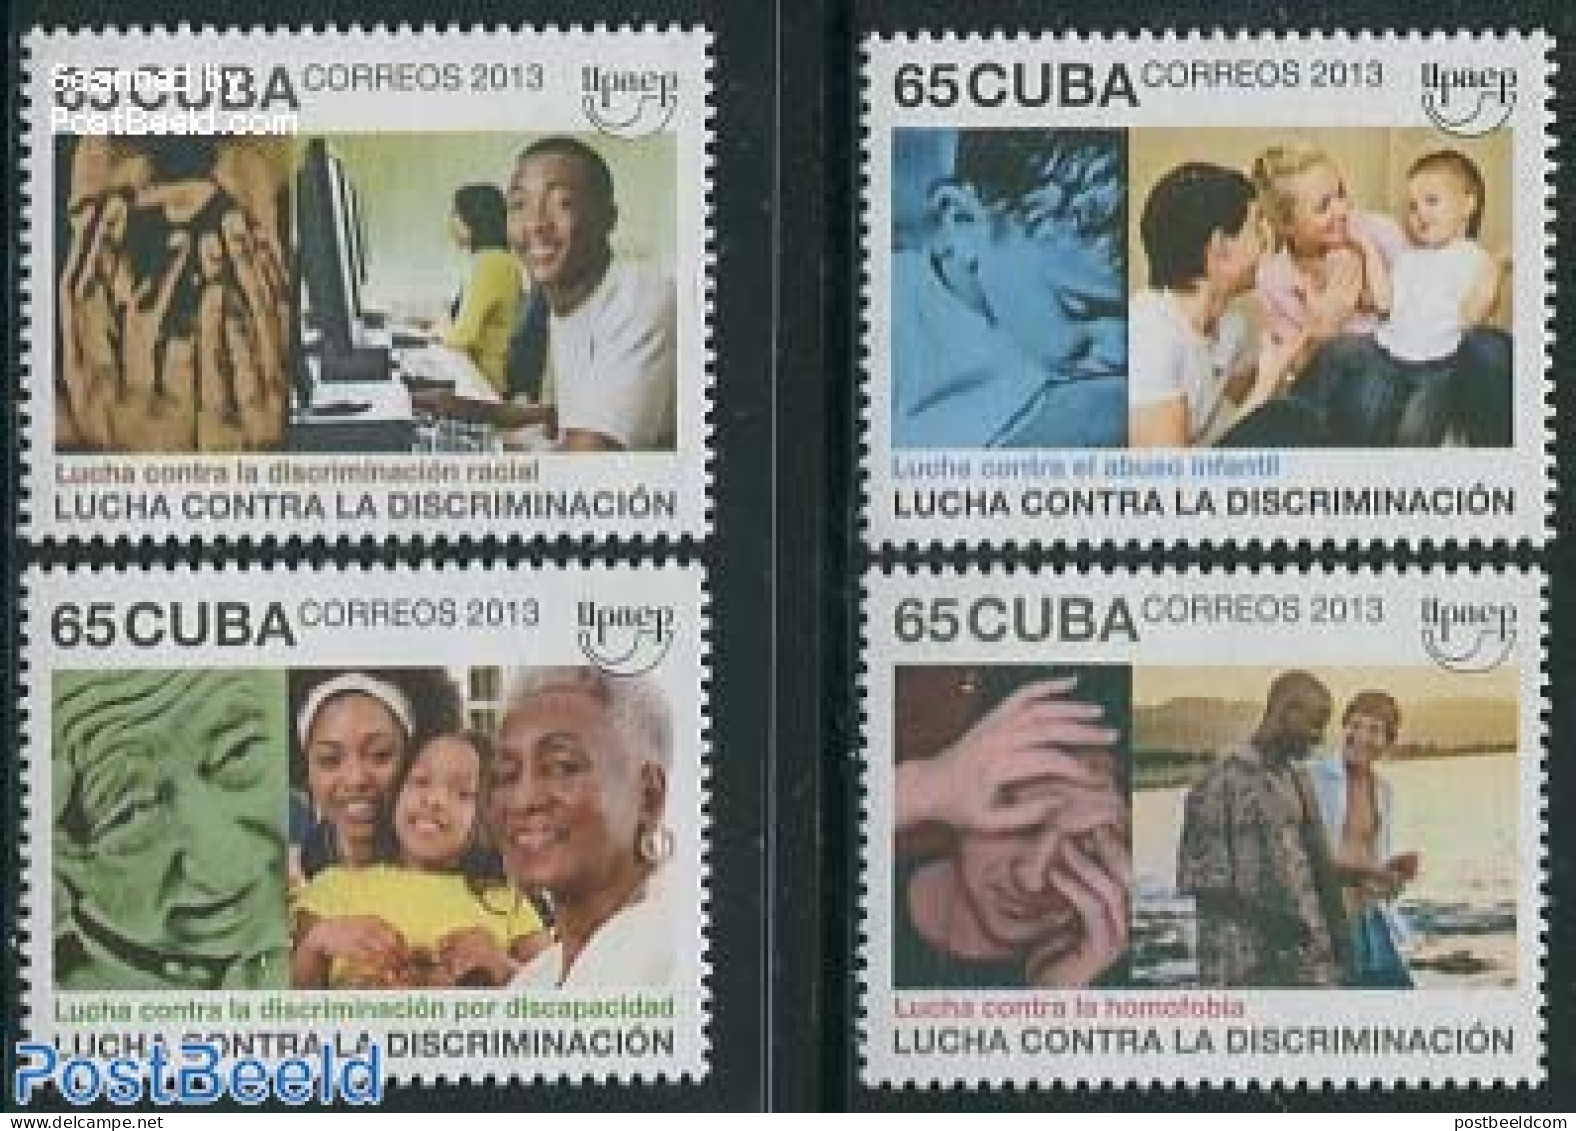 Cuba 2013 UPAEP 4v, Mint NH, Science - Computers & IT - U.P.A.E. - Unused Stamps